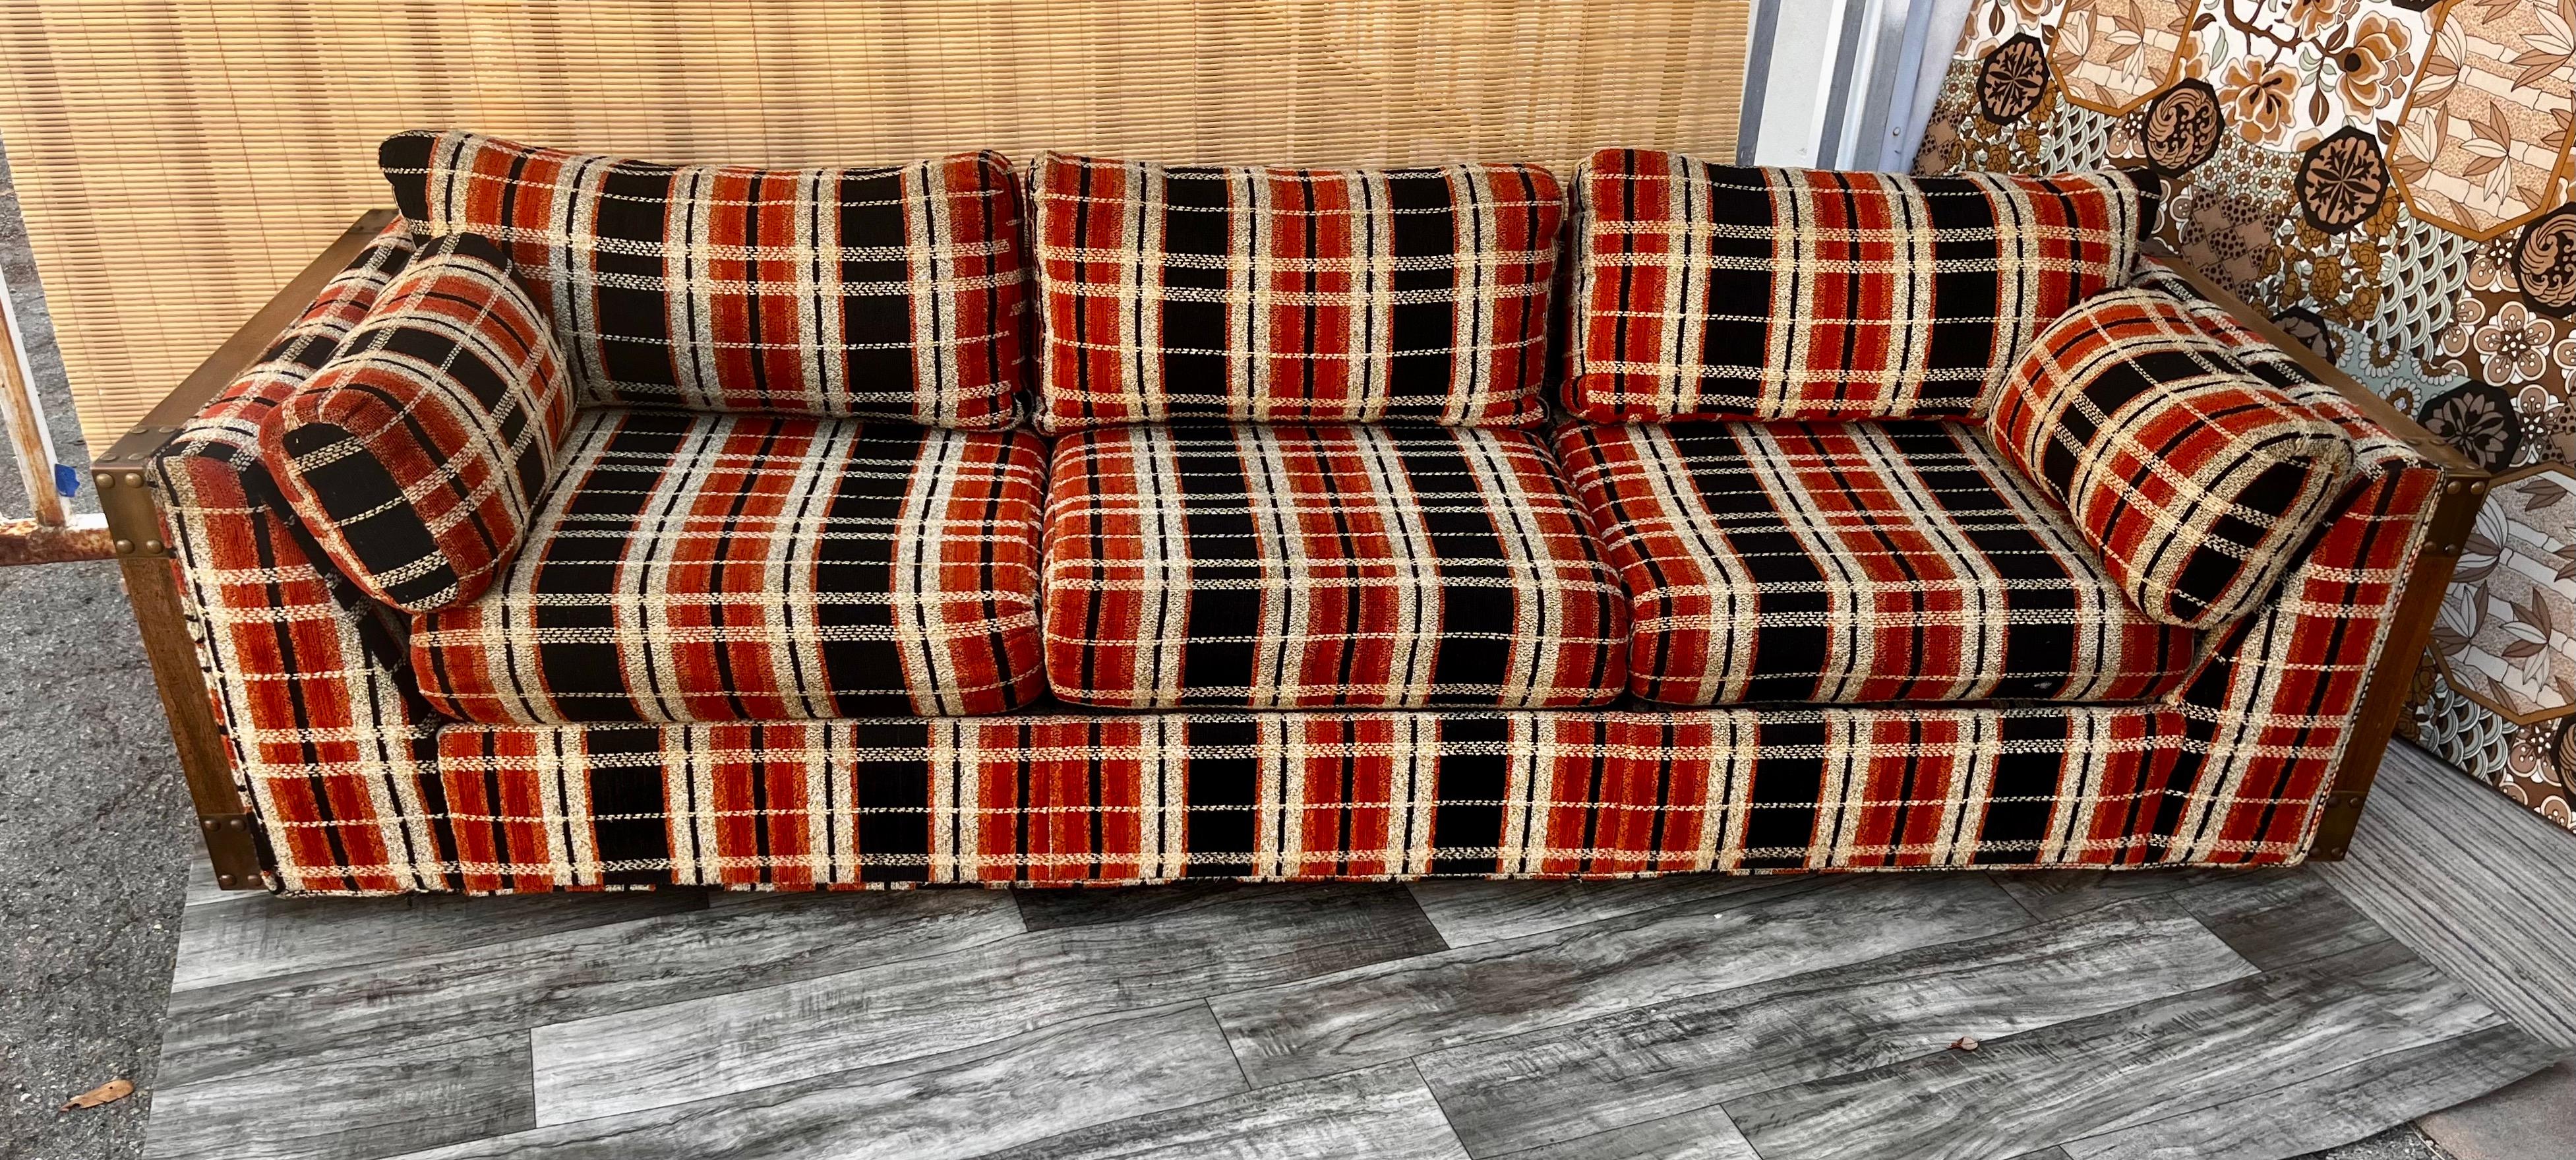 1970's couch